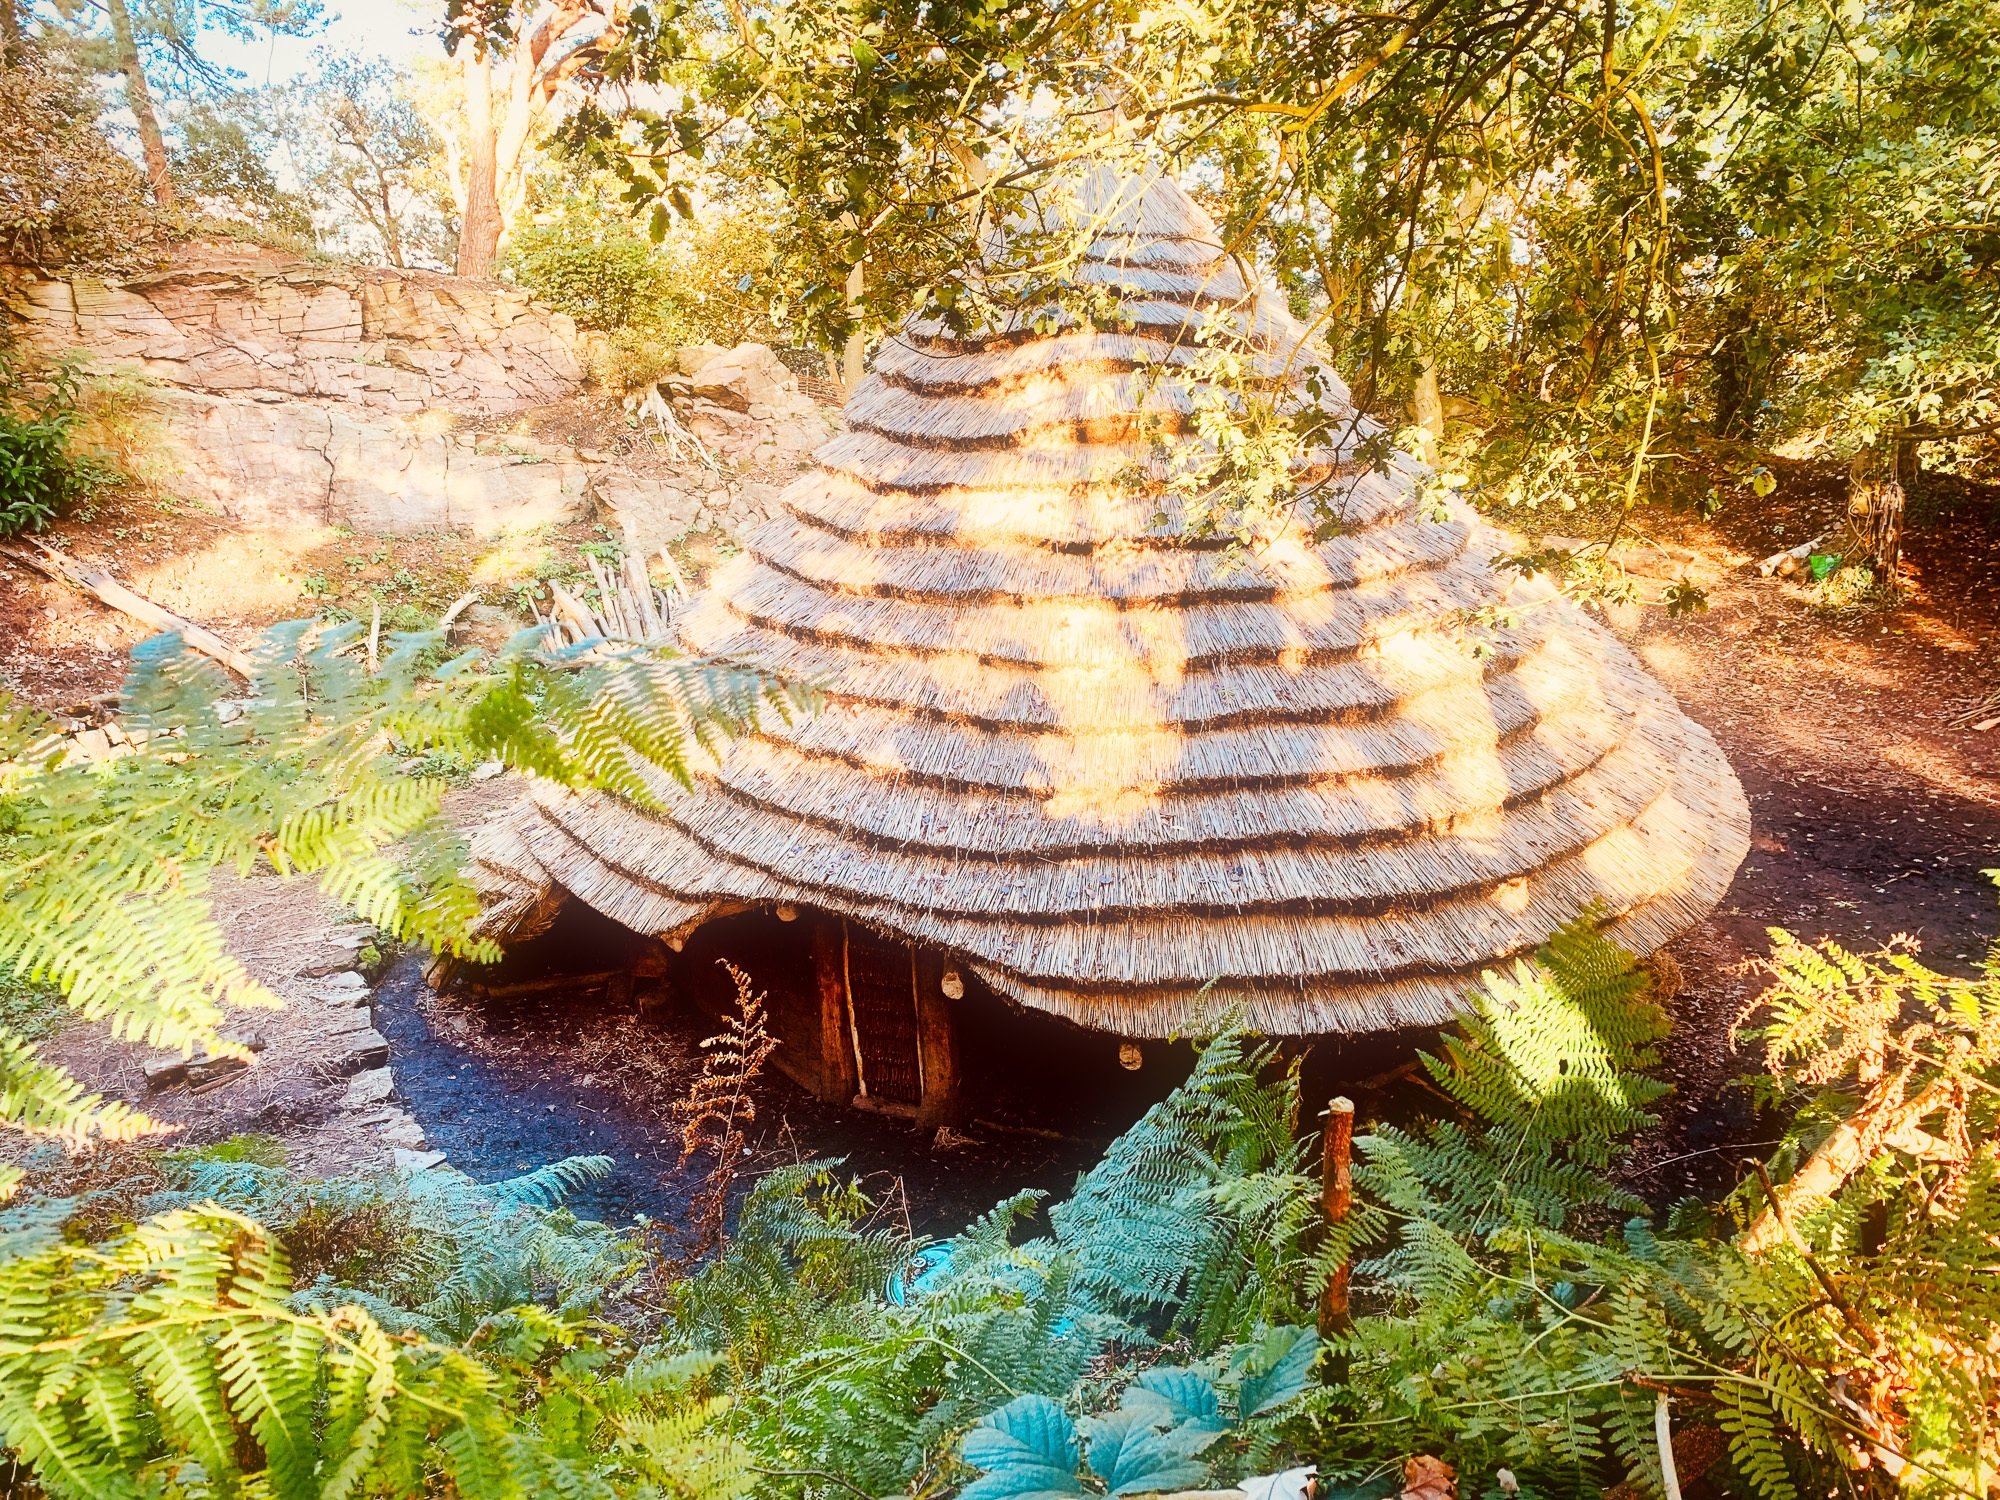 A bronze age round house